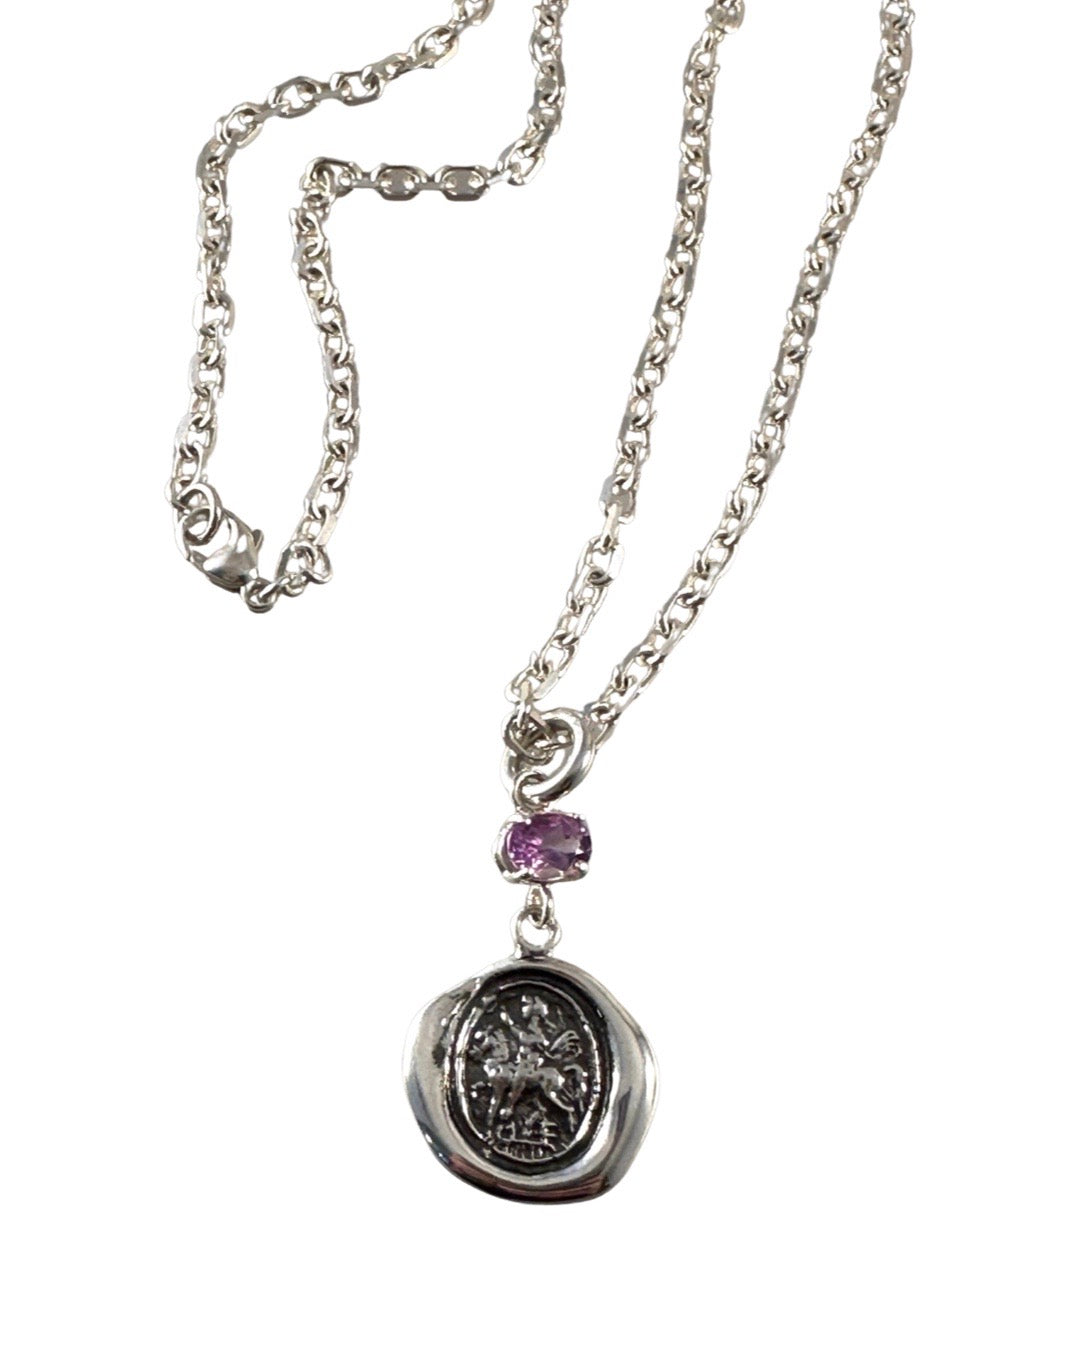 18" Sterling Silver Saint George Crest Necklace with Amethyst